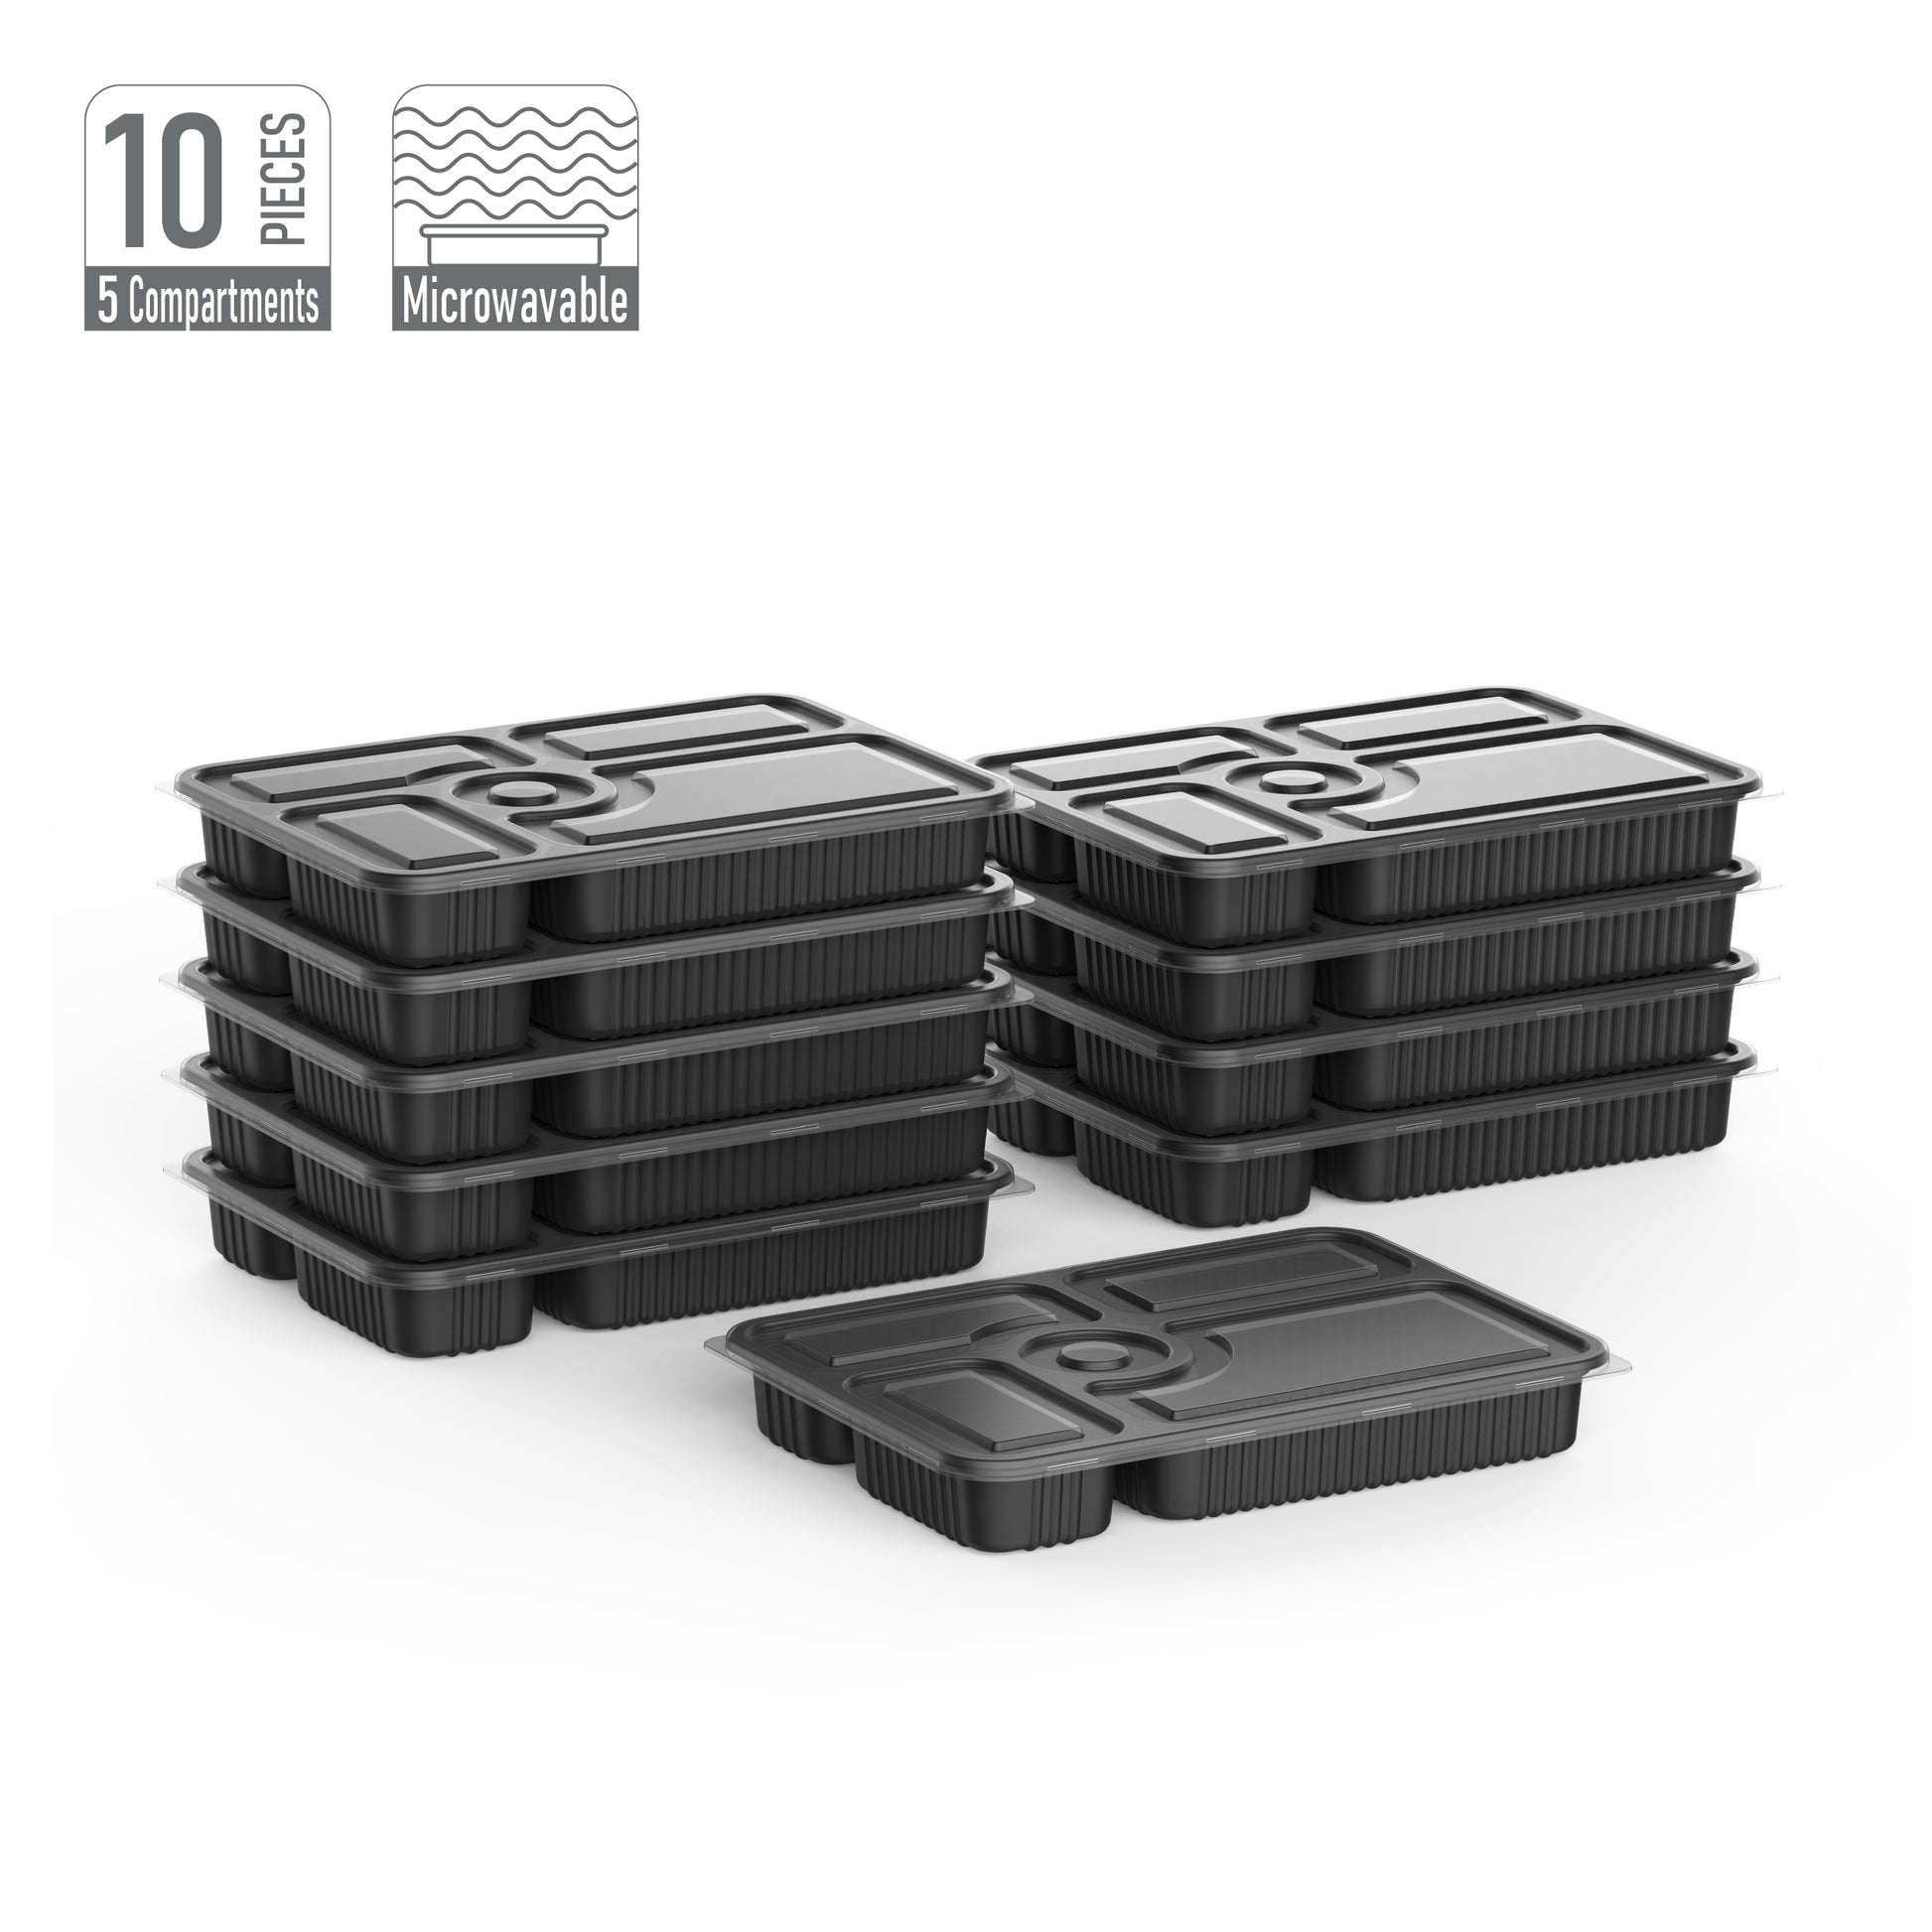 5 Compartments Pack of 10 Black Meal Containers with Clear Lids